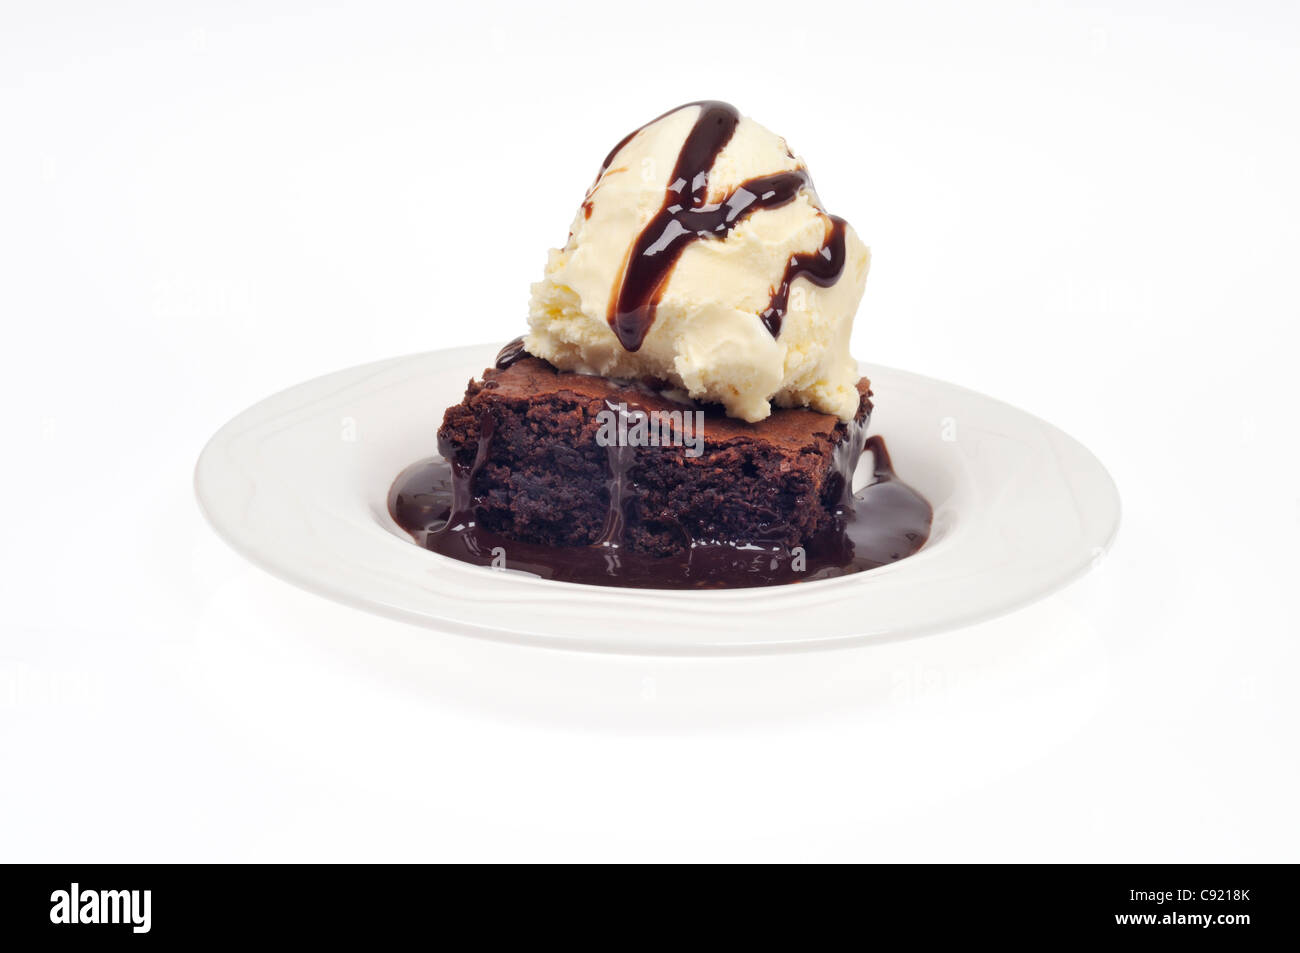 Chocolate fudge brownie with vanilla ice cream and a drizzle of chocolate sauce on white background cutout Stock Photo